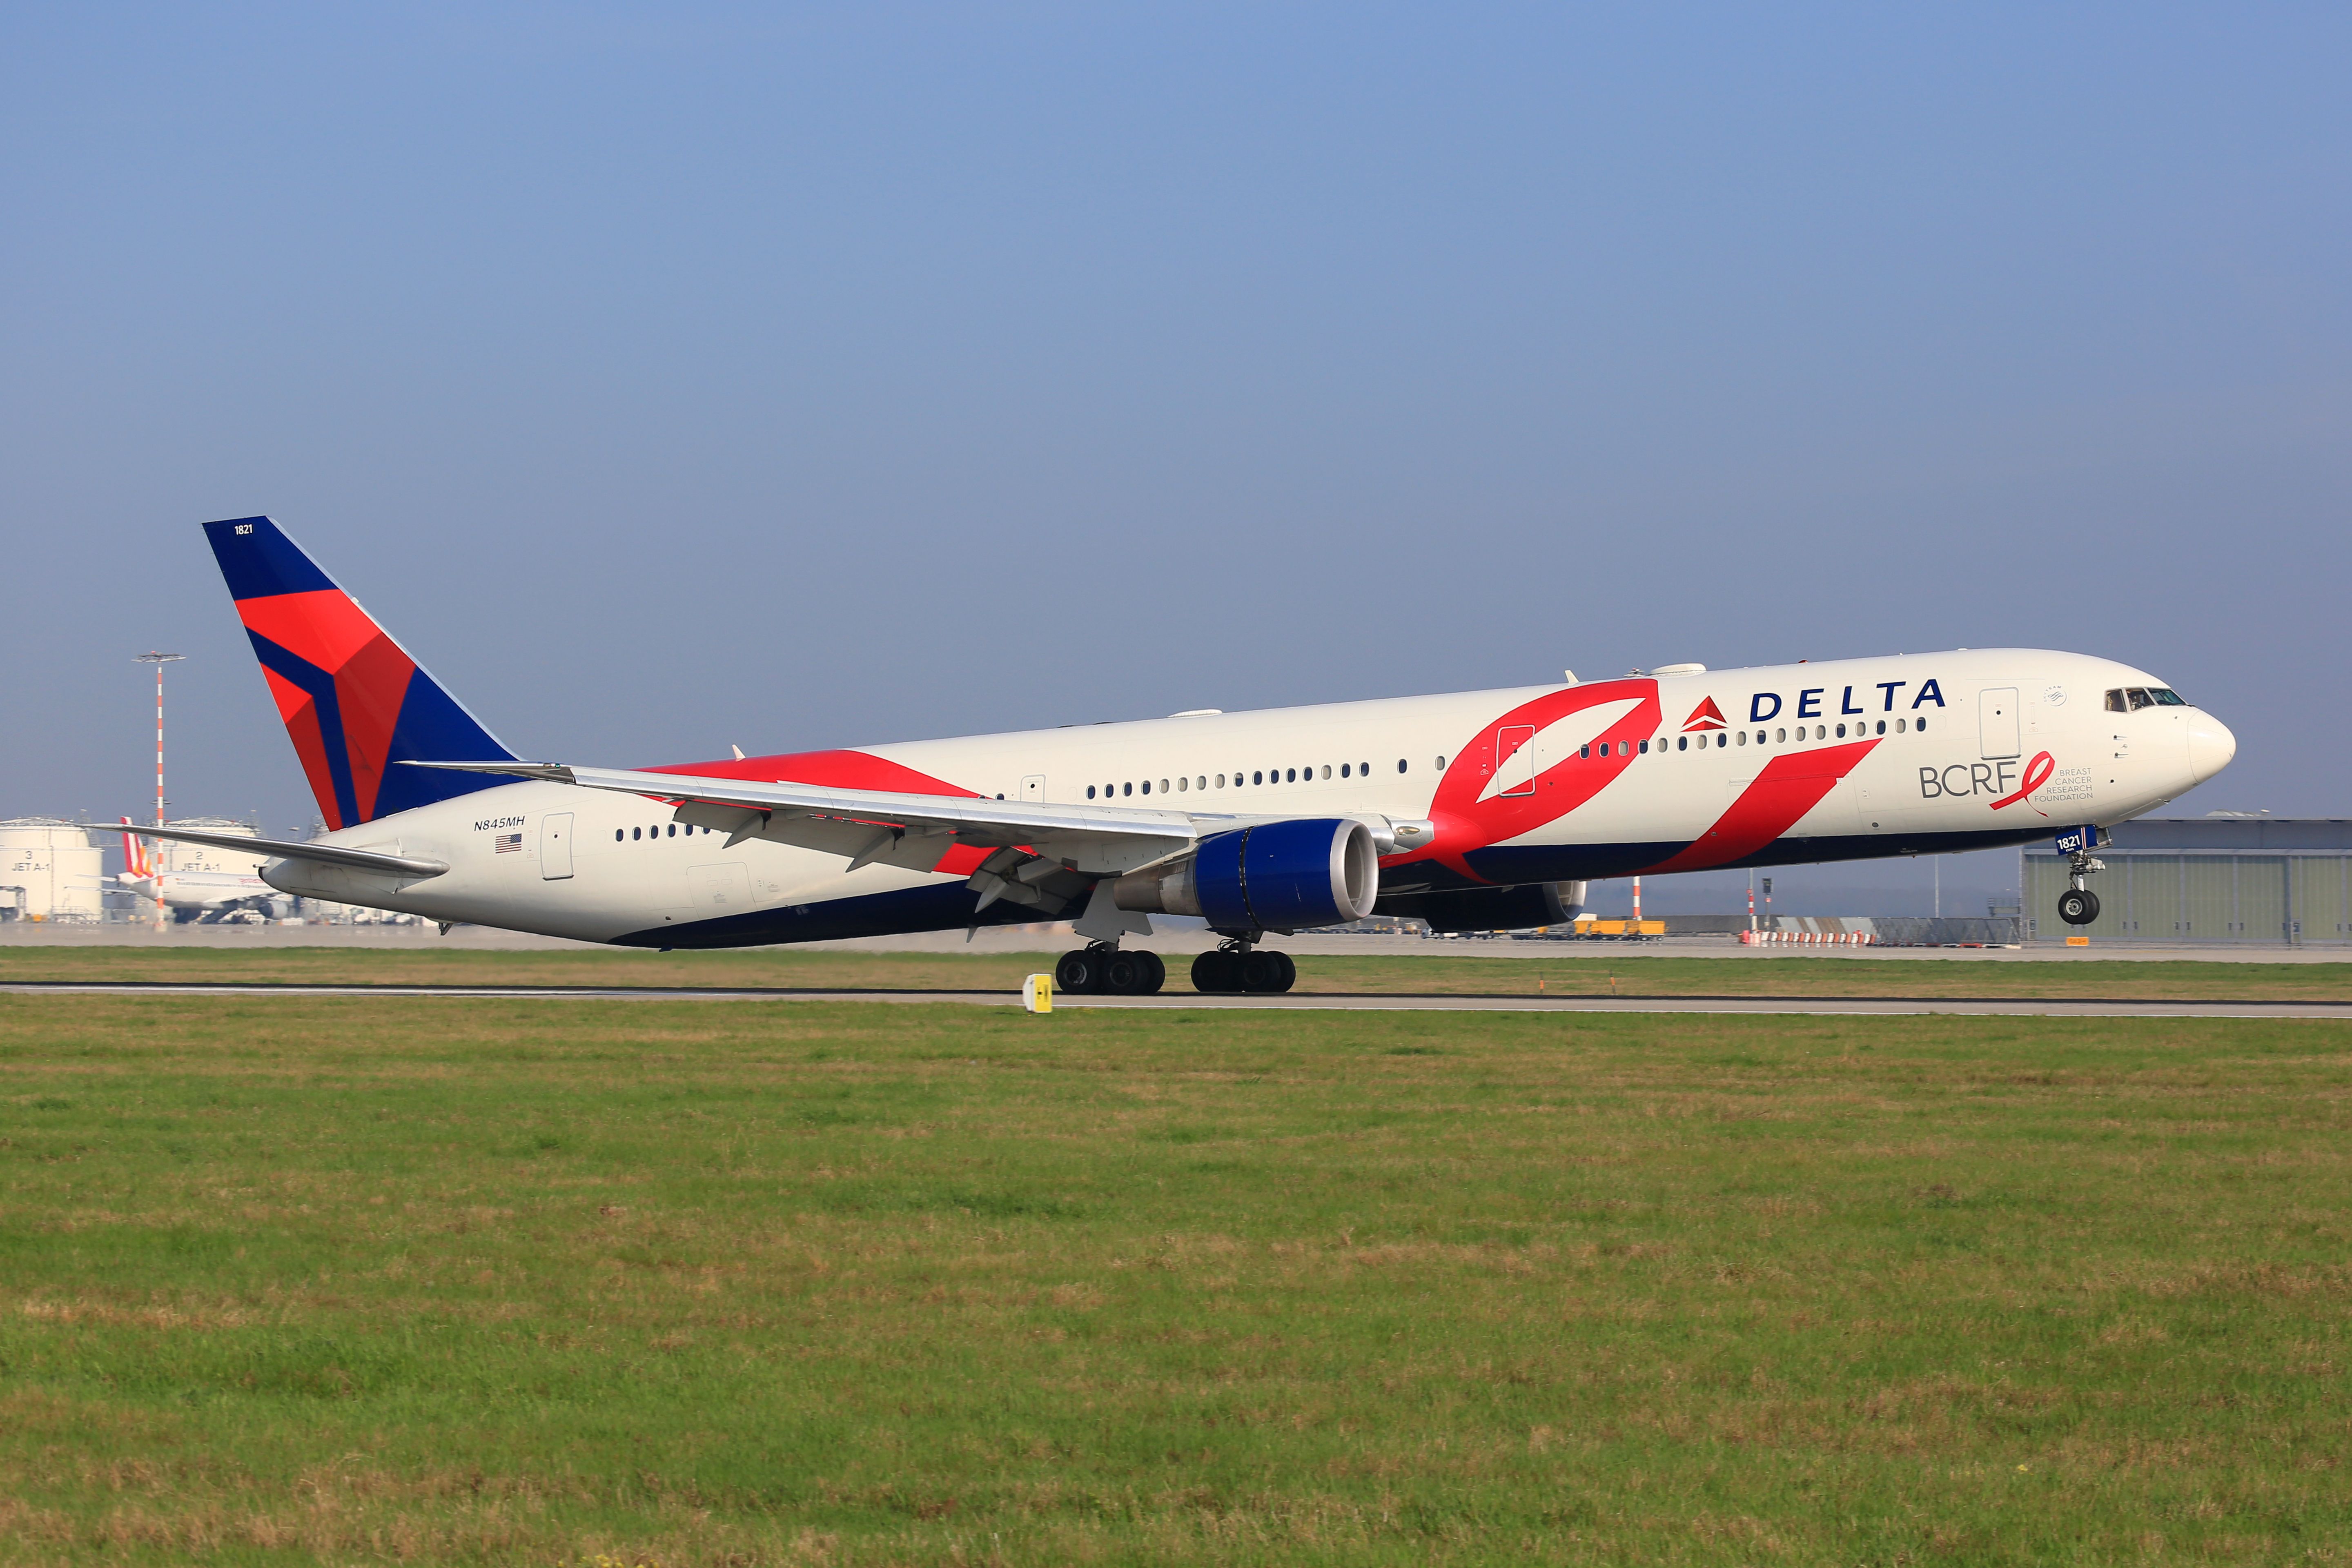 A Delta Air Lines Boeing 767-400ER in Breast Cancer Research Foundation livery taking off.